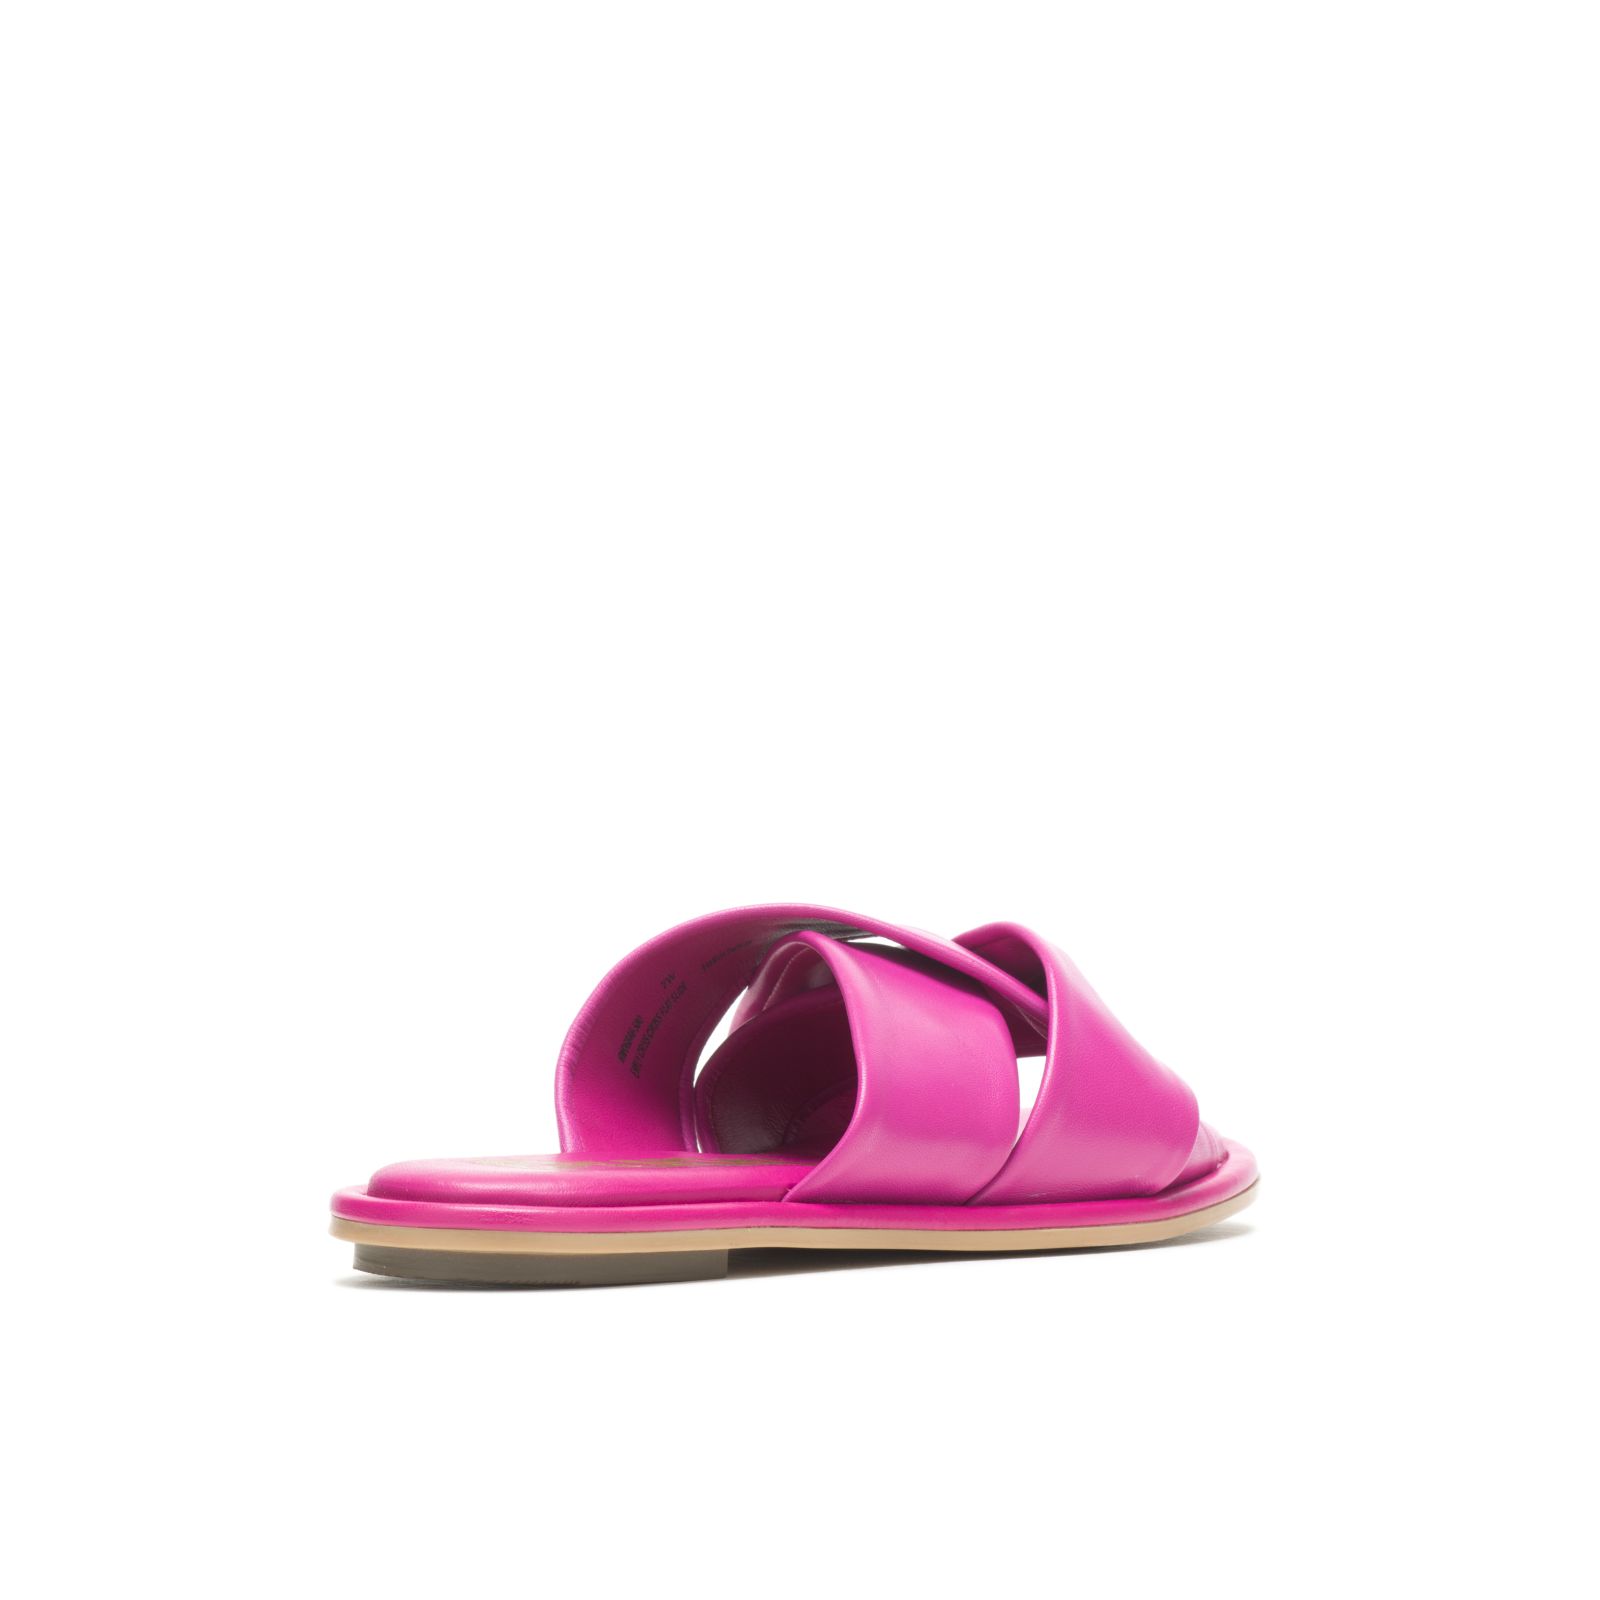 Sandalias Hush Puppies Emily Chanclas Mujer Very Berry Leather | QVWPSOT-90